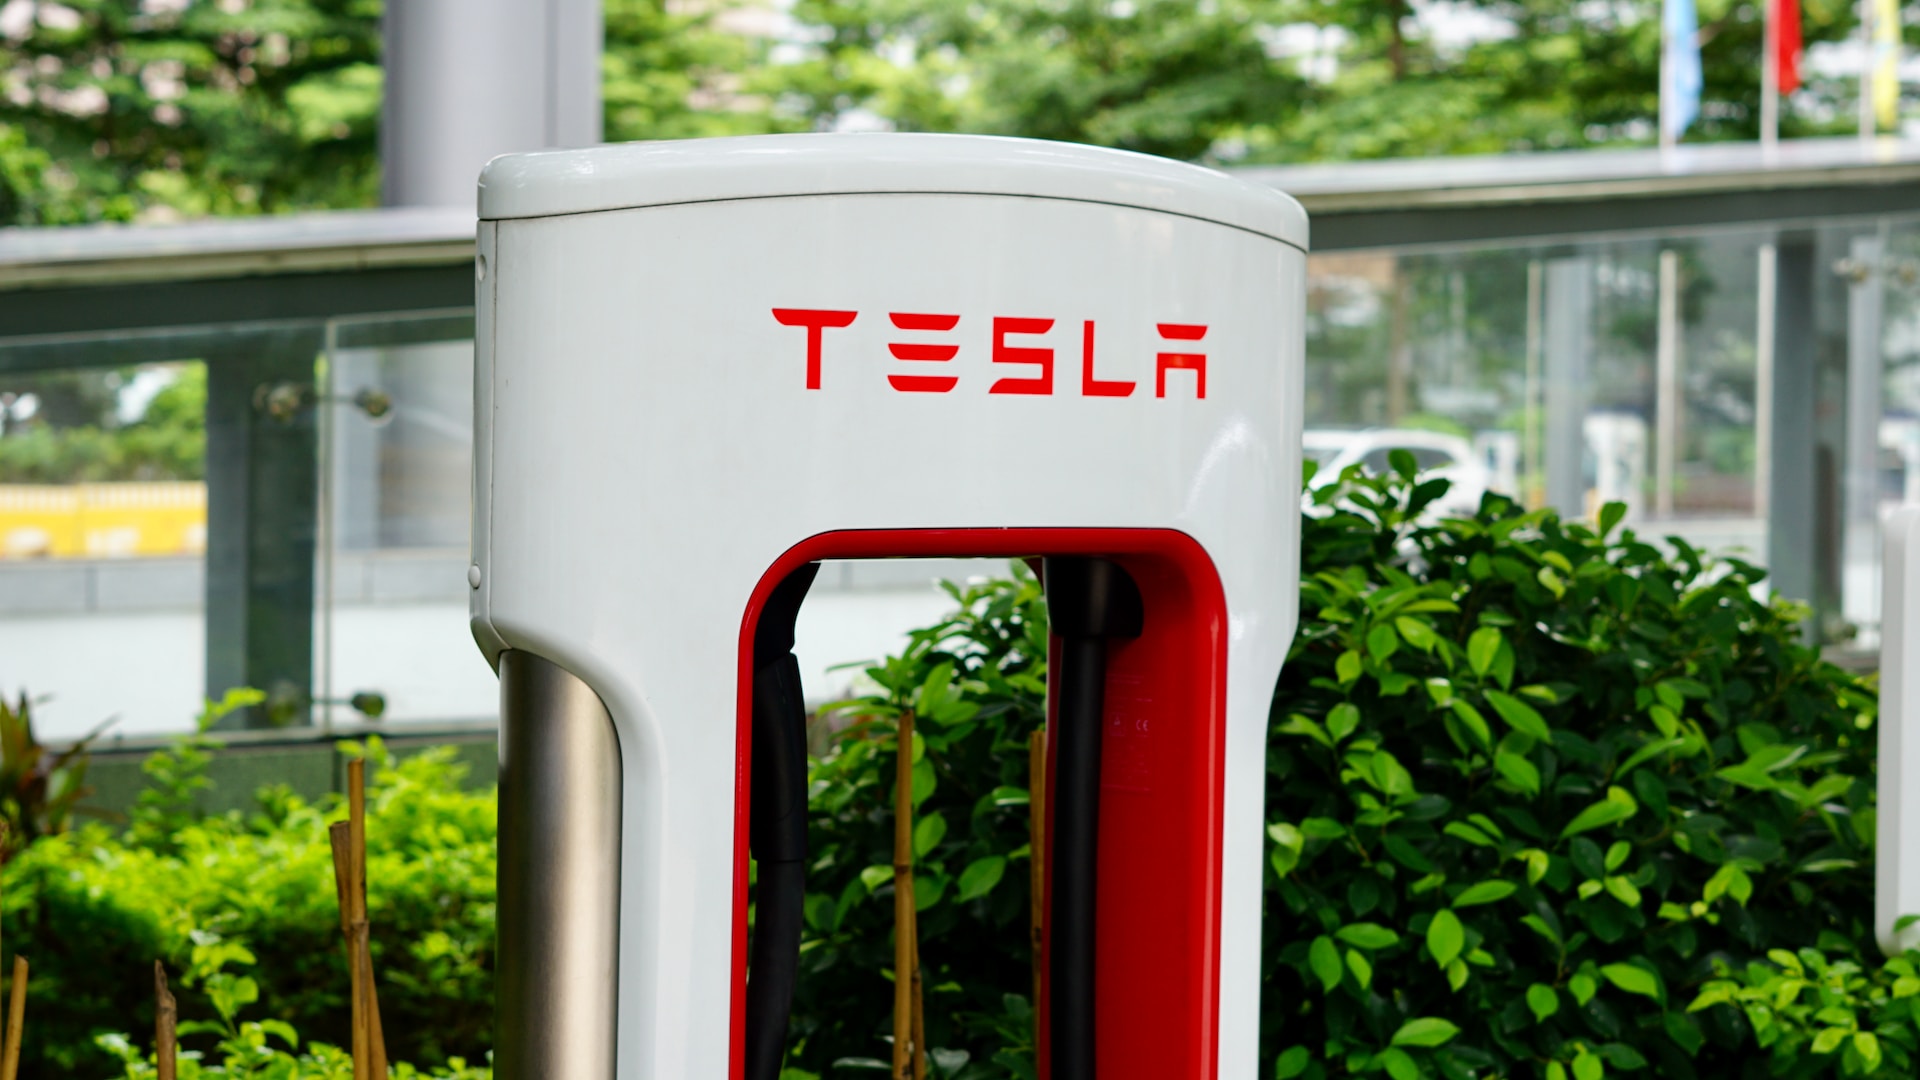 Electric vehicle chargers are top priority for corporate office renters - Photo by Neo Tan on Unsplash